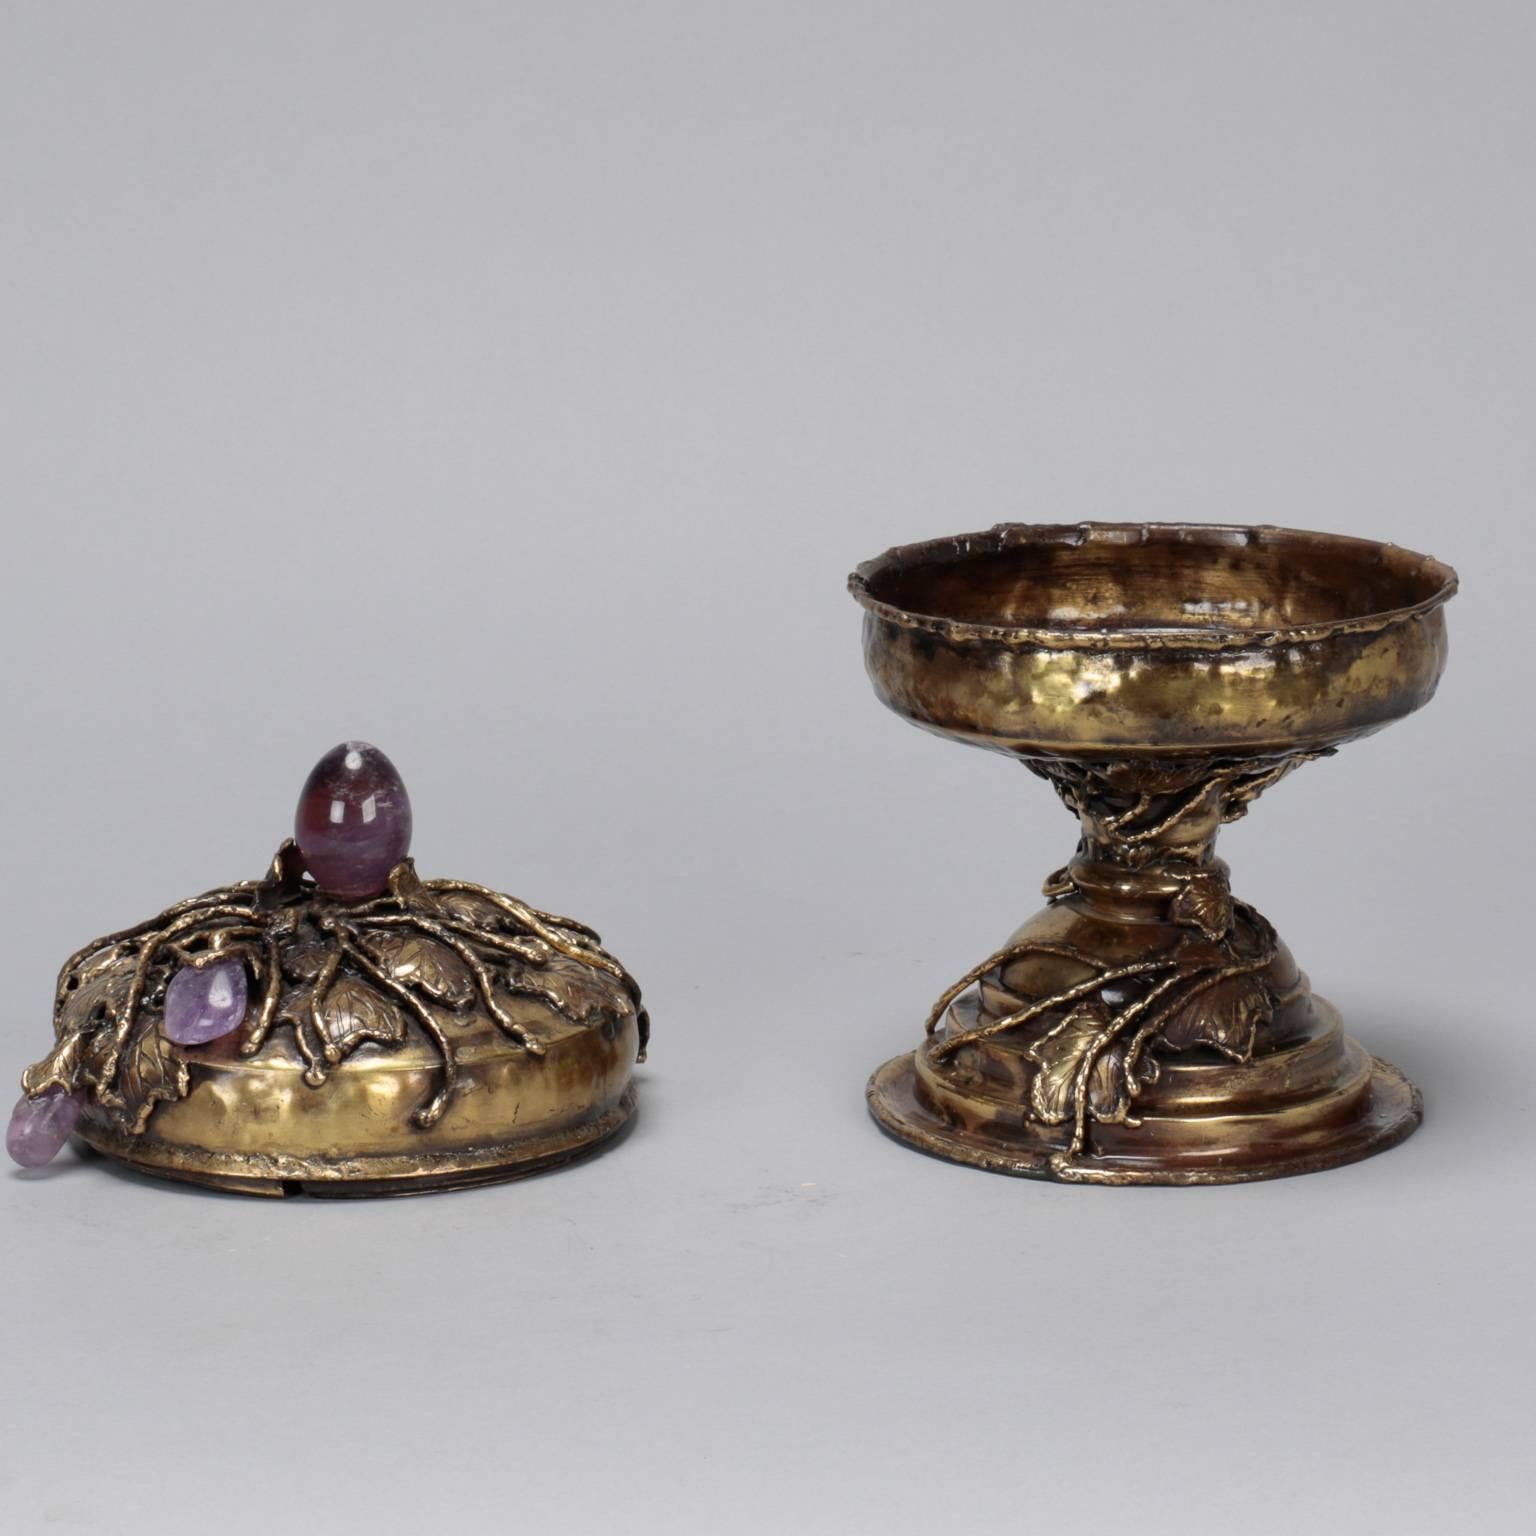 Signed Lionel on inside of footed base, this bronze colored hand worked lidded tazza is decorated with a leaf and vine motif and amethyst stones. Other pieces by this artist available at the time of this posting. Please inquire.
  